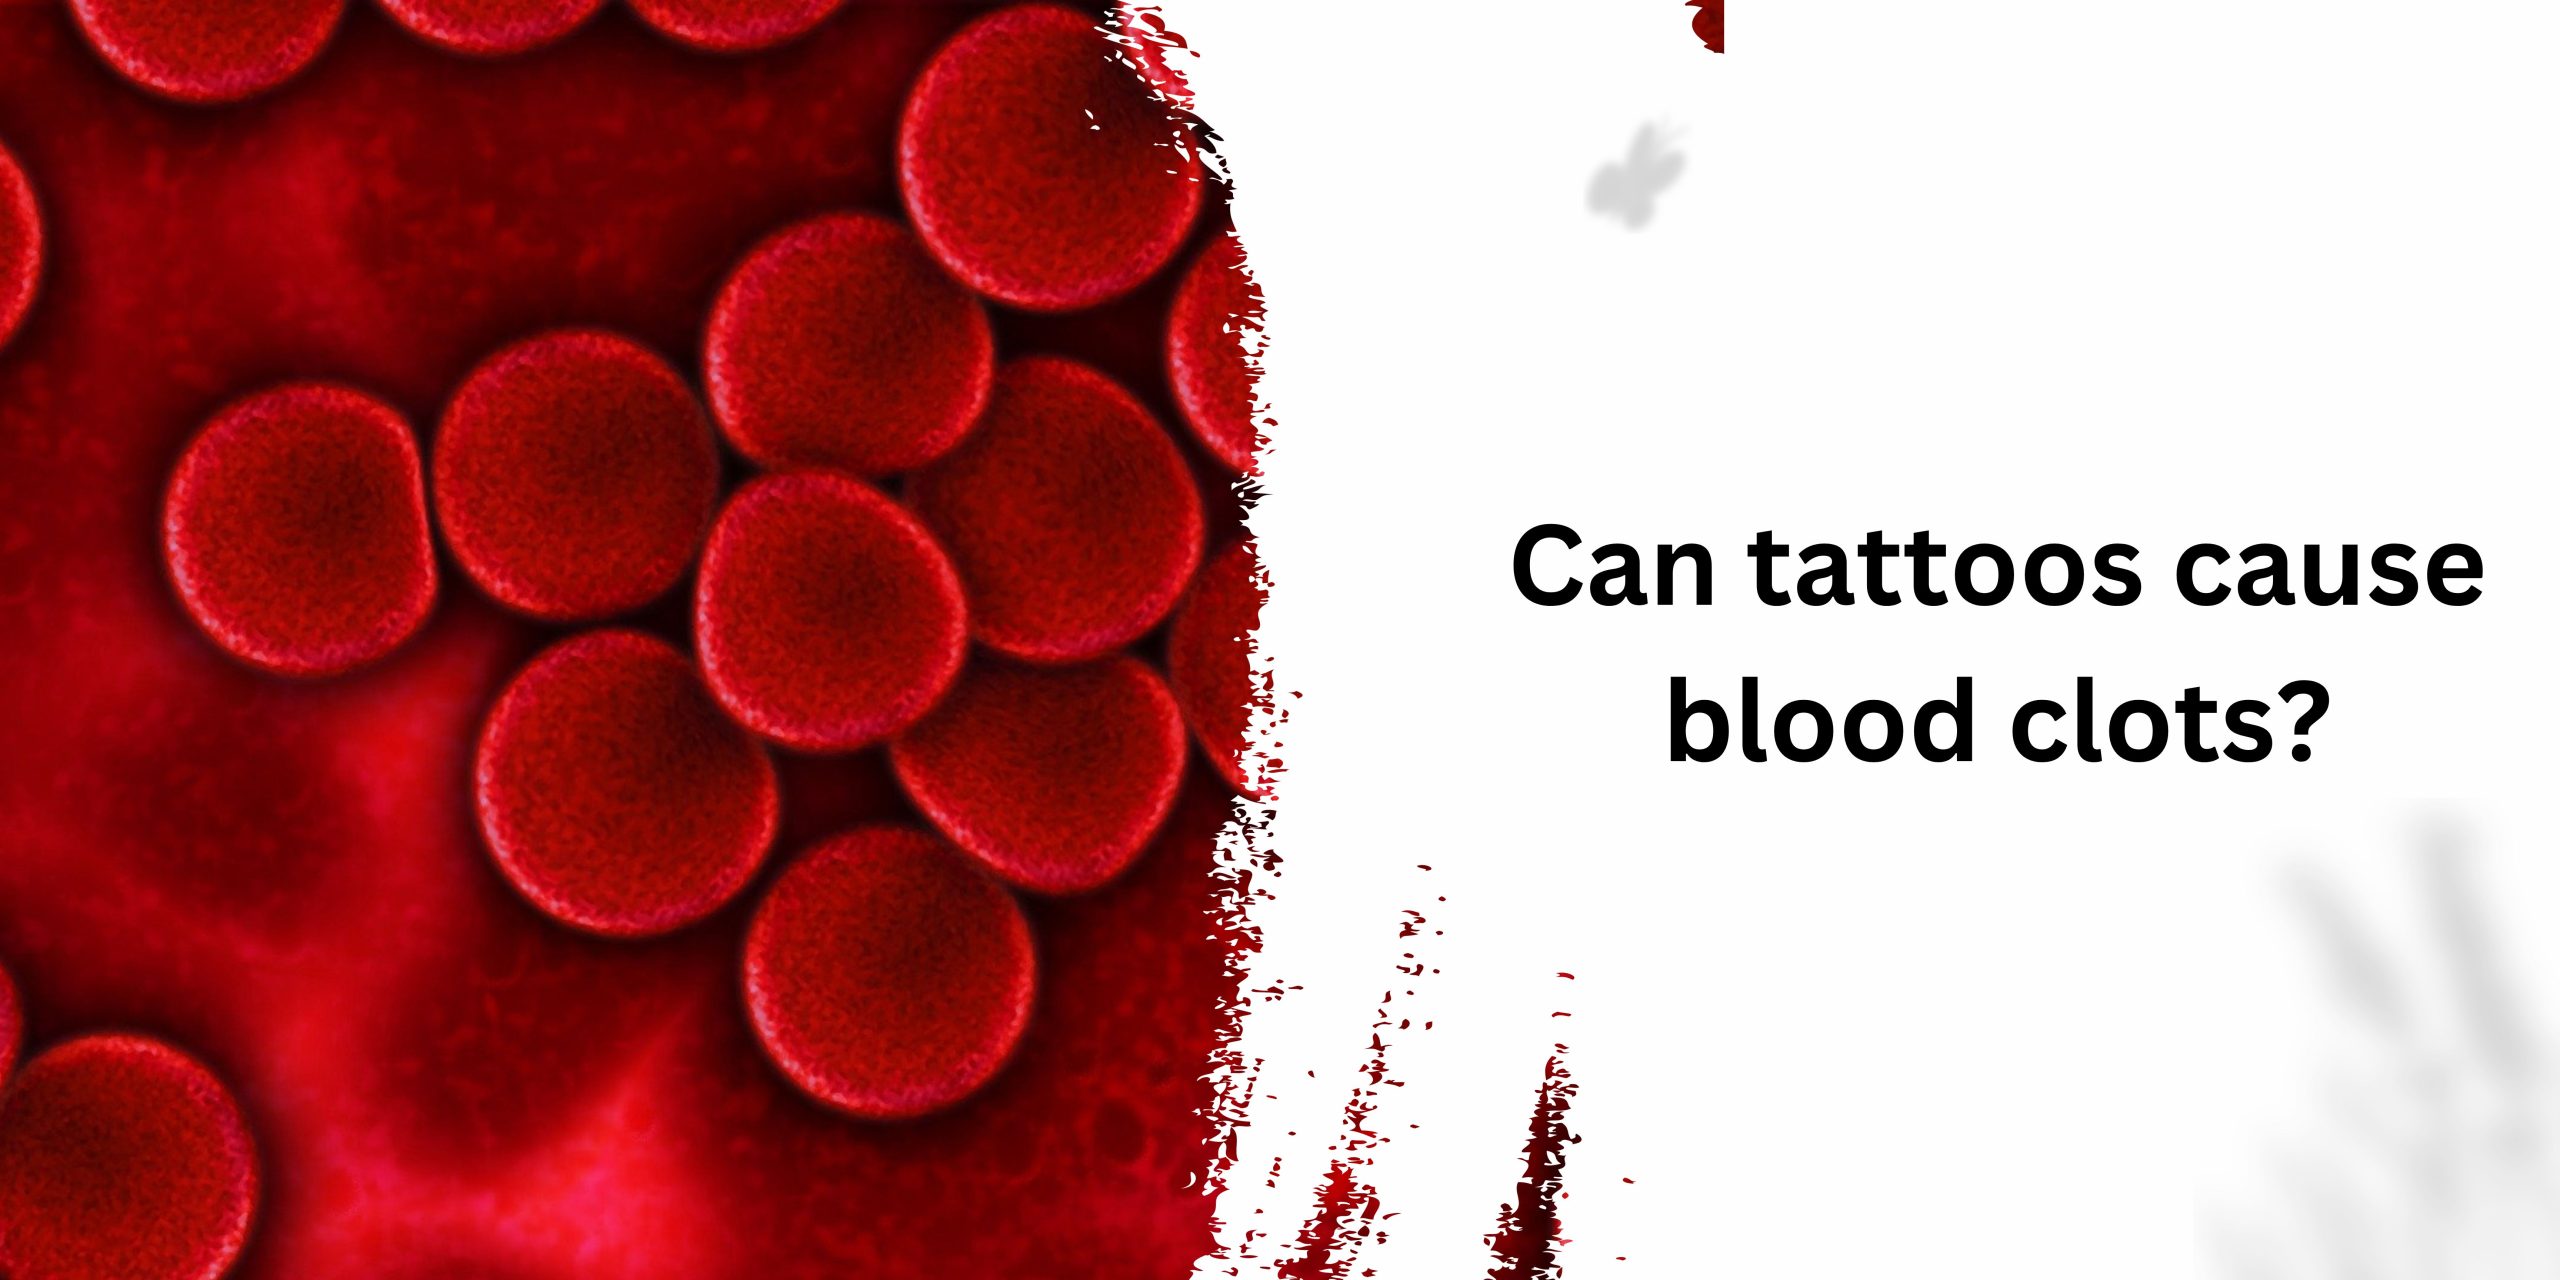 Can tattoos cause blood clots